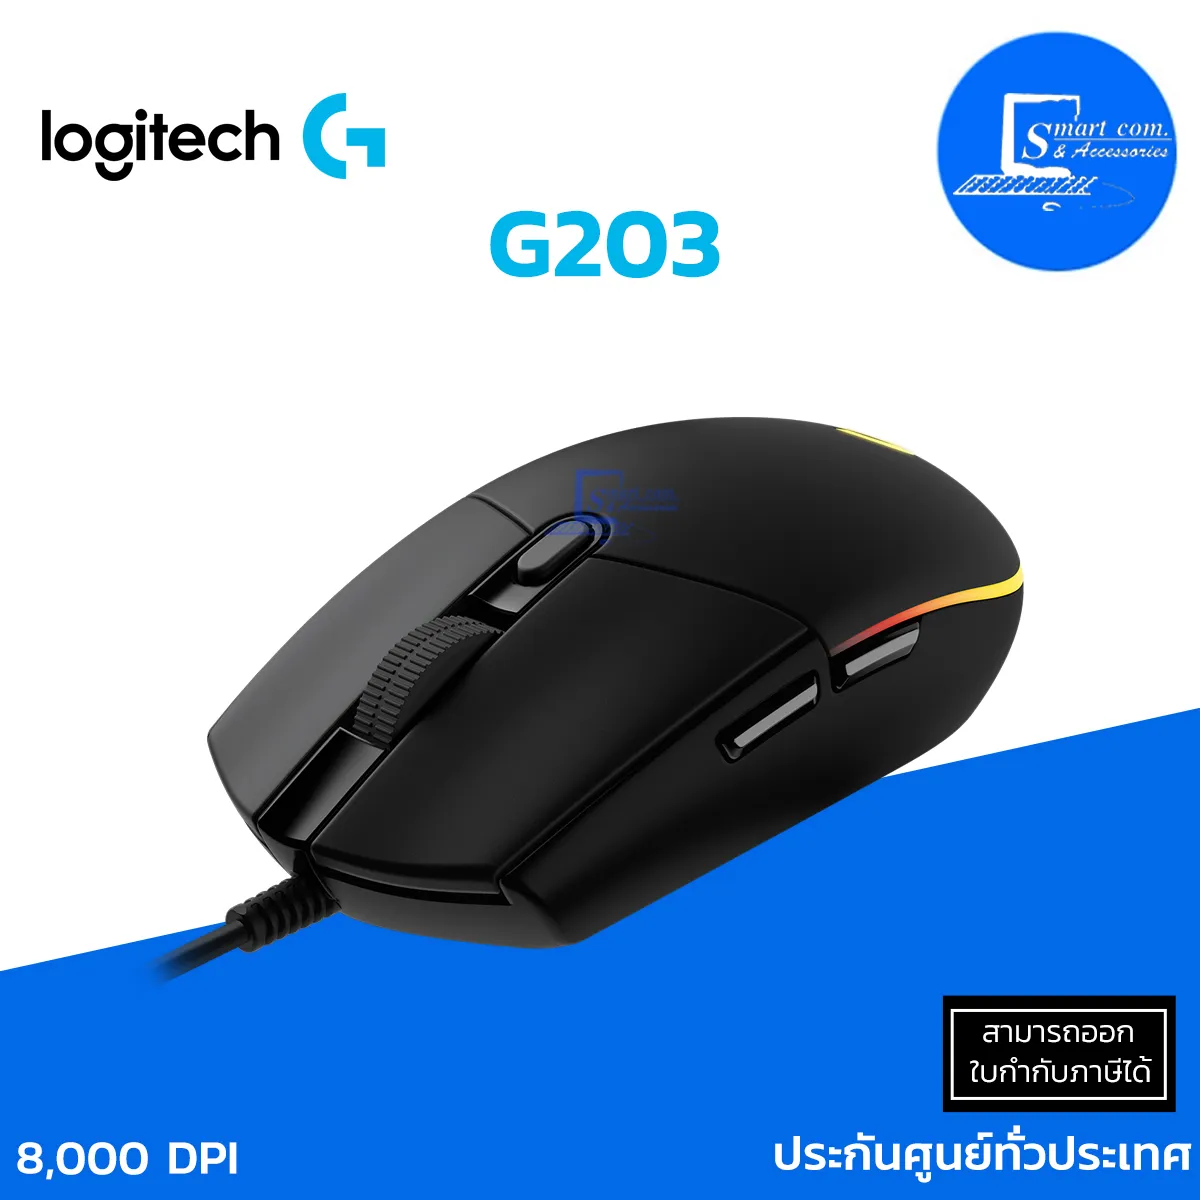 Wired G203 LIGHTSYNC Logitech Gaming Mouse